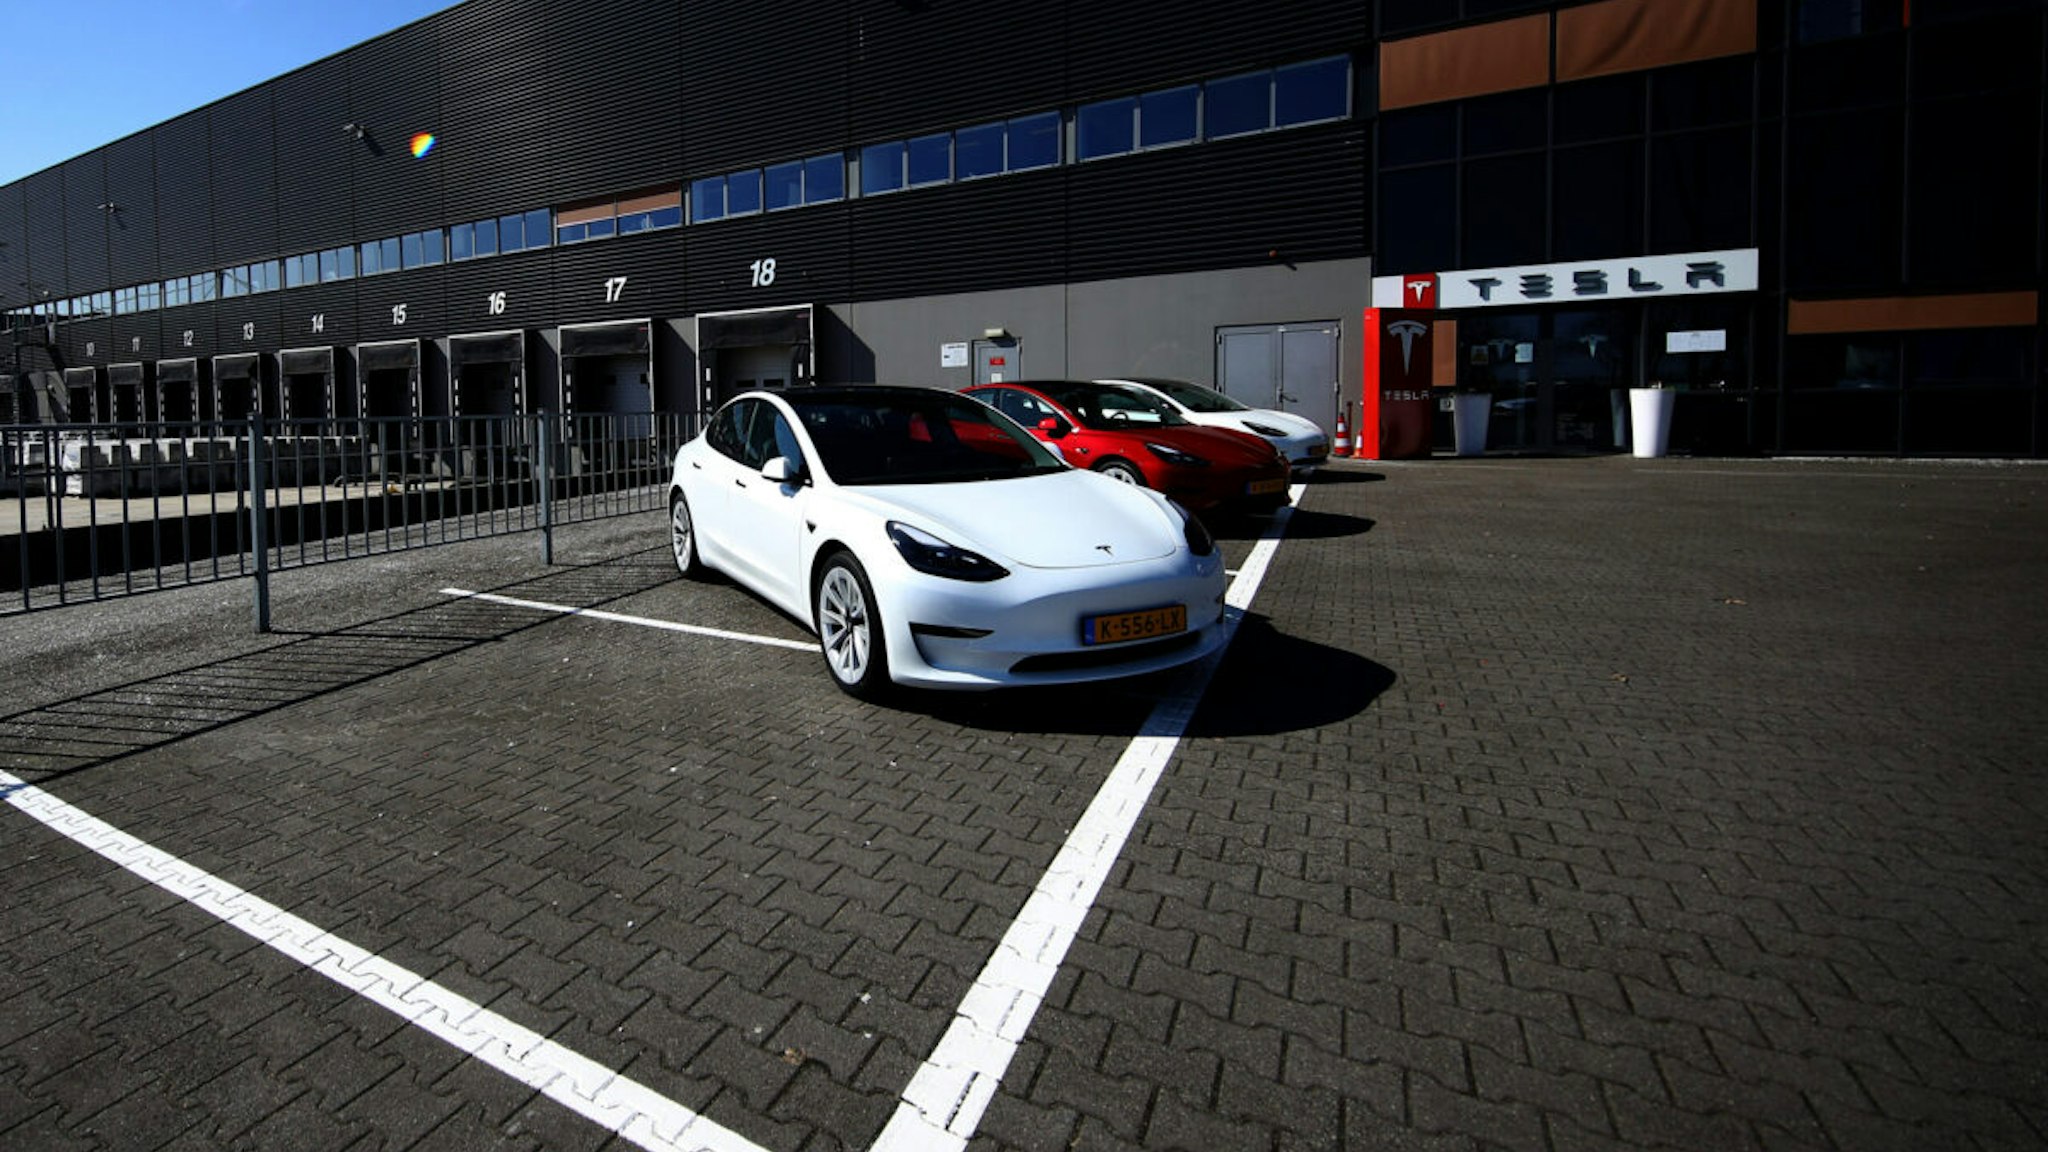 A general view of the Tesla Assembly plant building which also does vehicle delivery and has a service centre, on March 29, 2021 in Tilburg, Netherlands